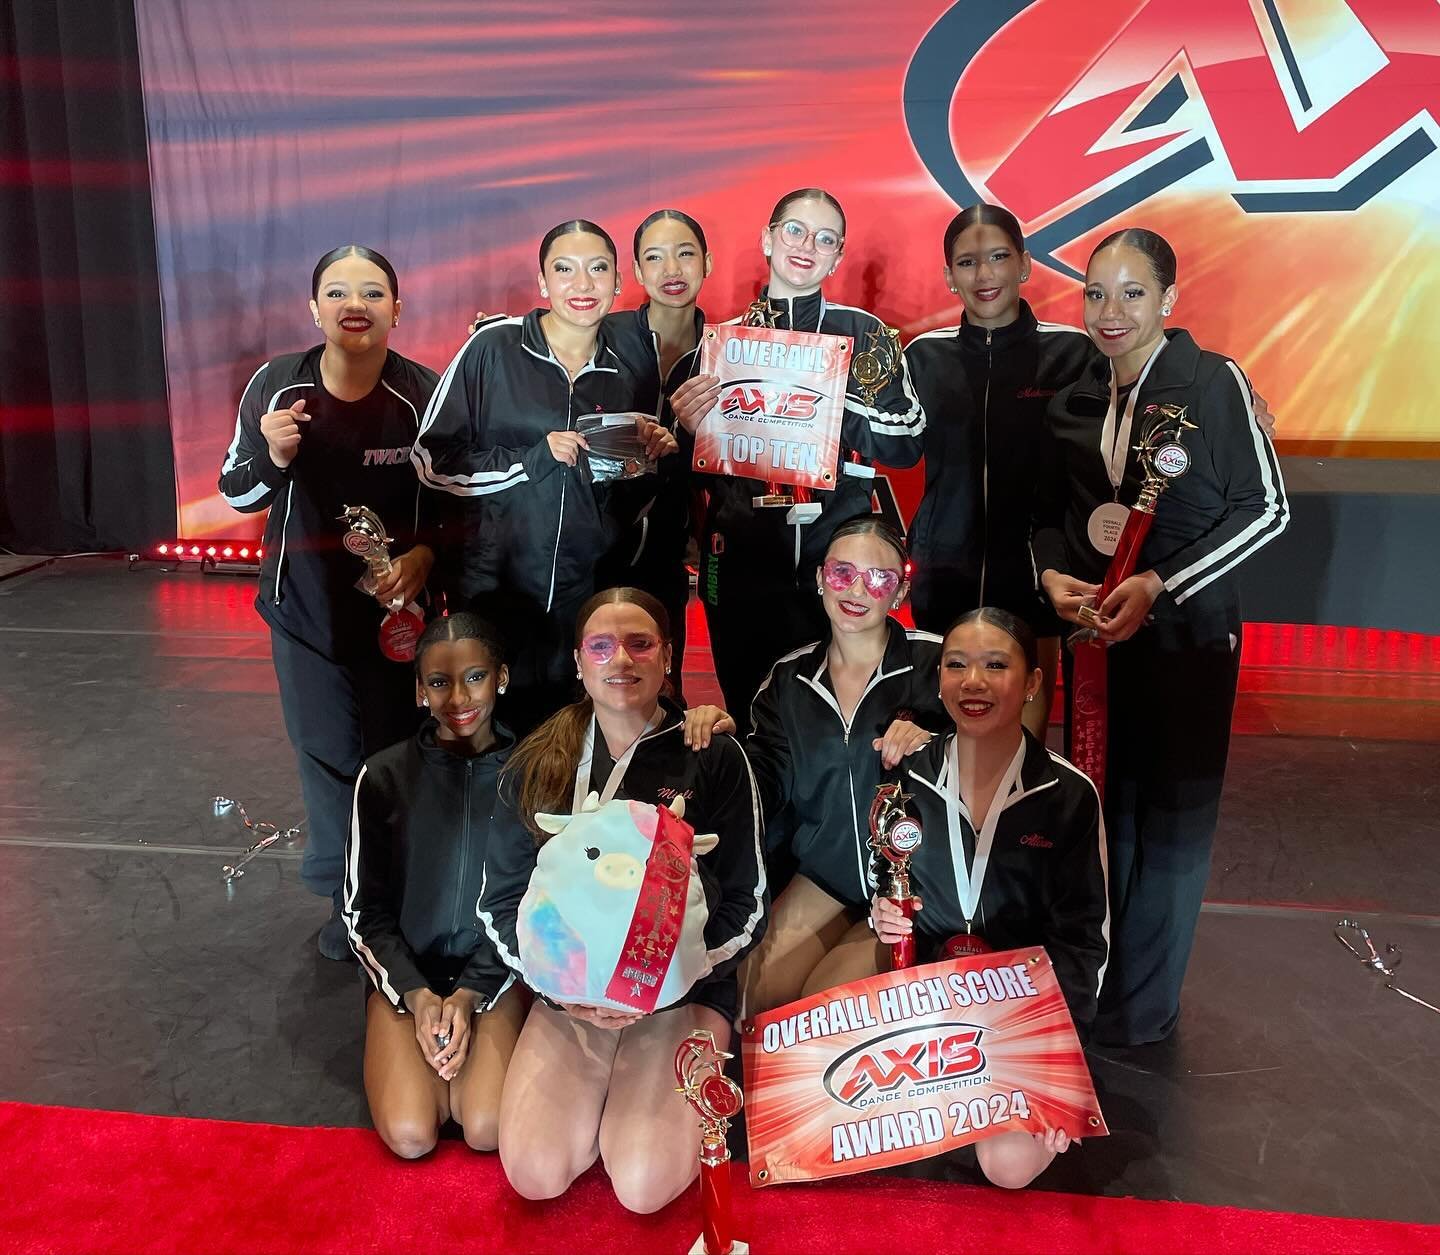 AXIS DAY 2!❤️&zwj;🔥 It&rsquo;s been SO fun! @axisdancecompetition 

Awards today went a little something like this⬇️

Junior Elite Solos
3rd- Roots
5th- Anything Worth Holding Onto
8th- Have a Little Faith

Junior Elite Small Groups
1ST- Nothing Els